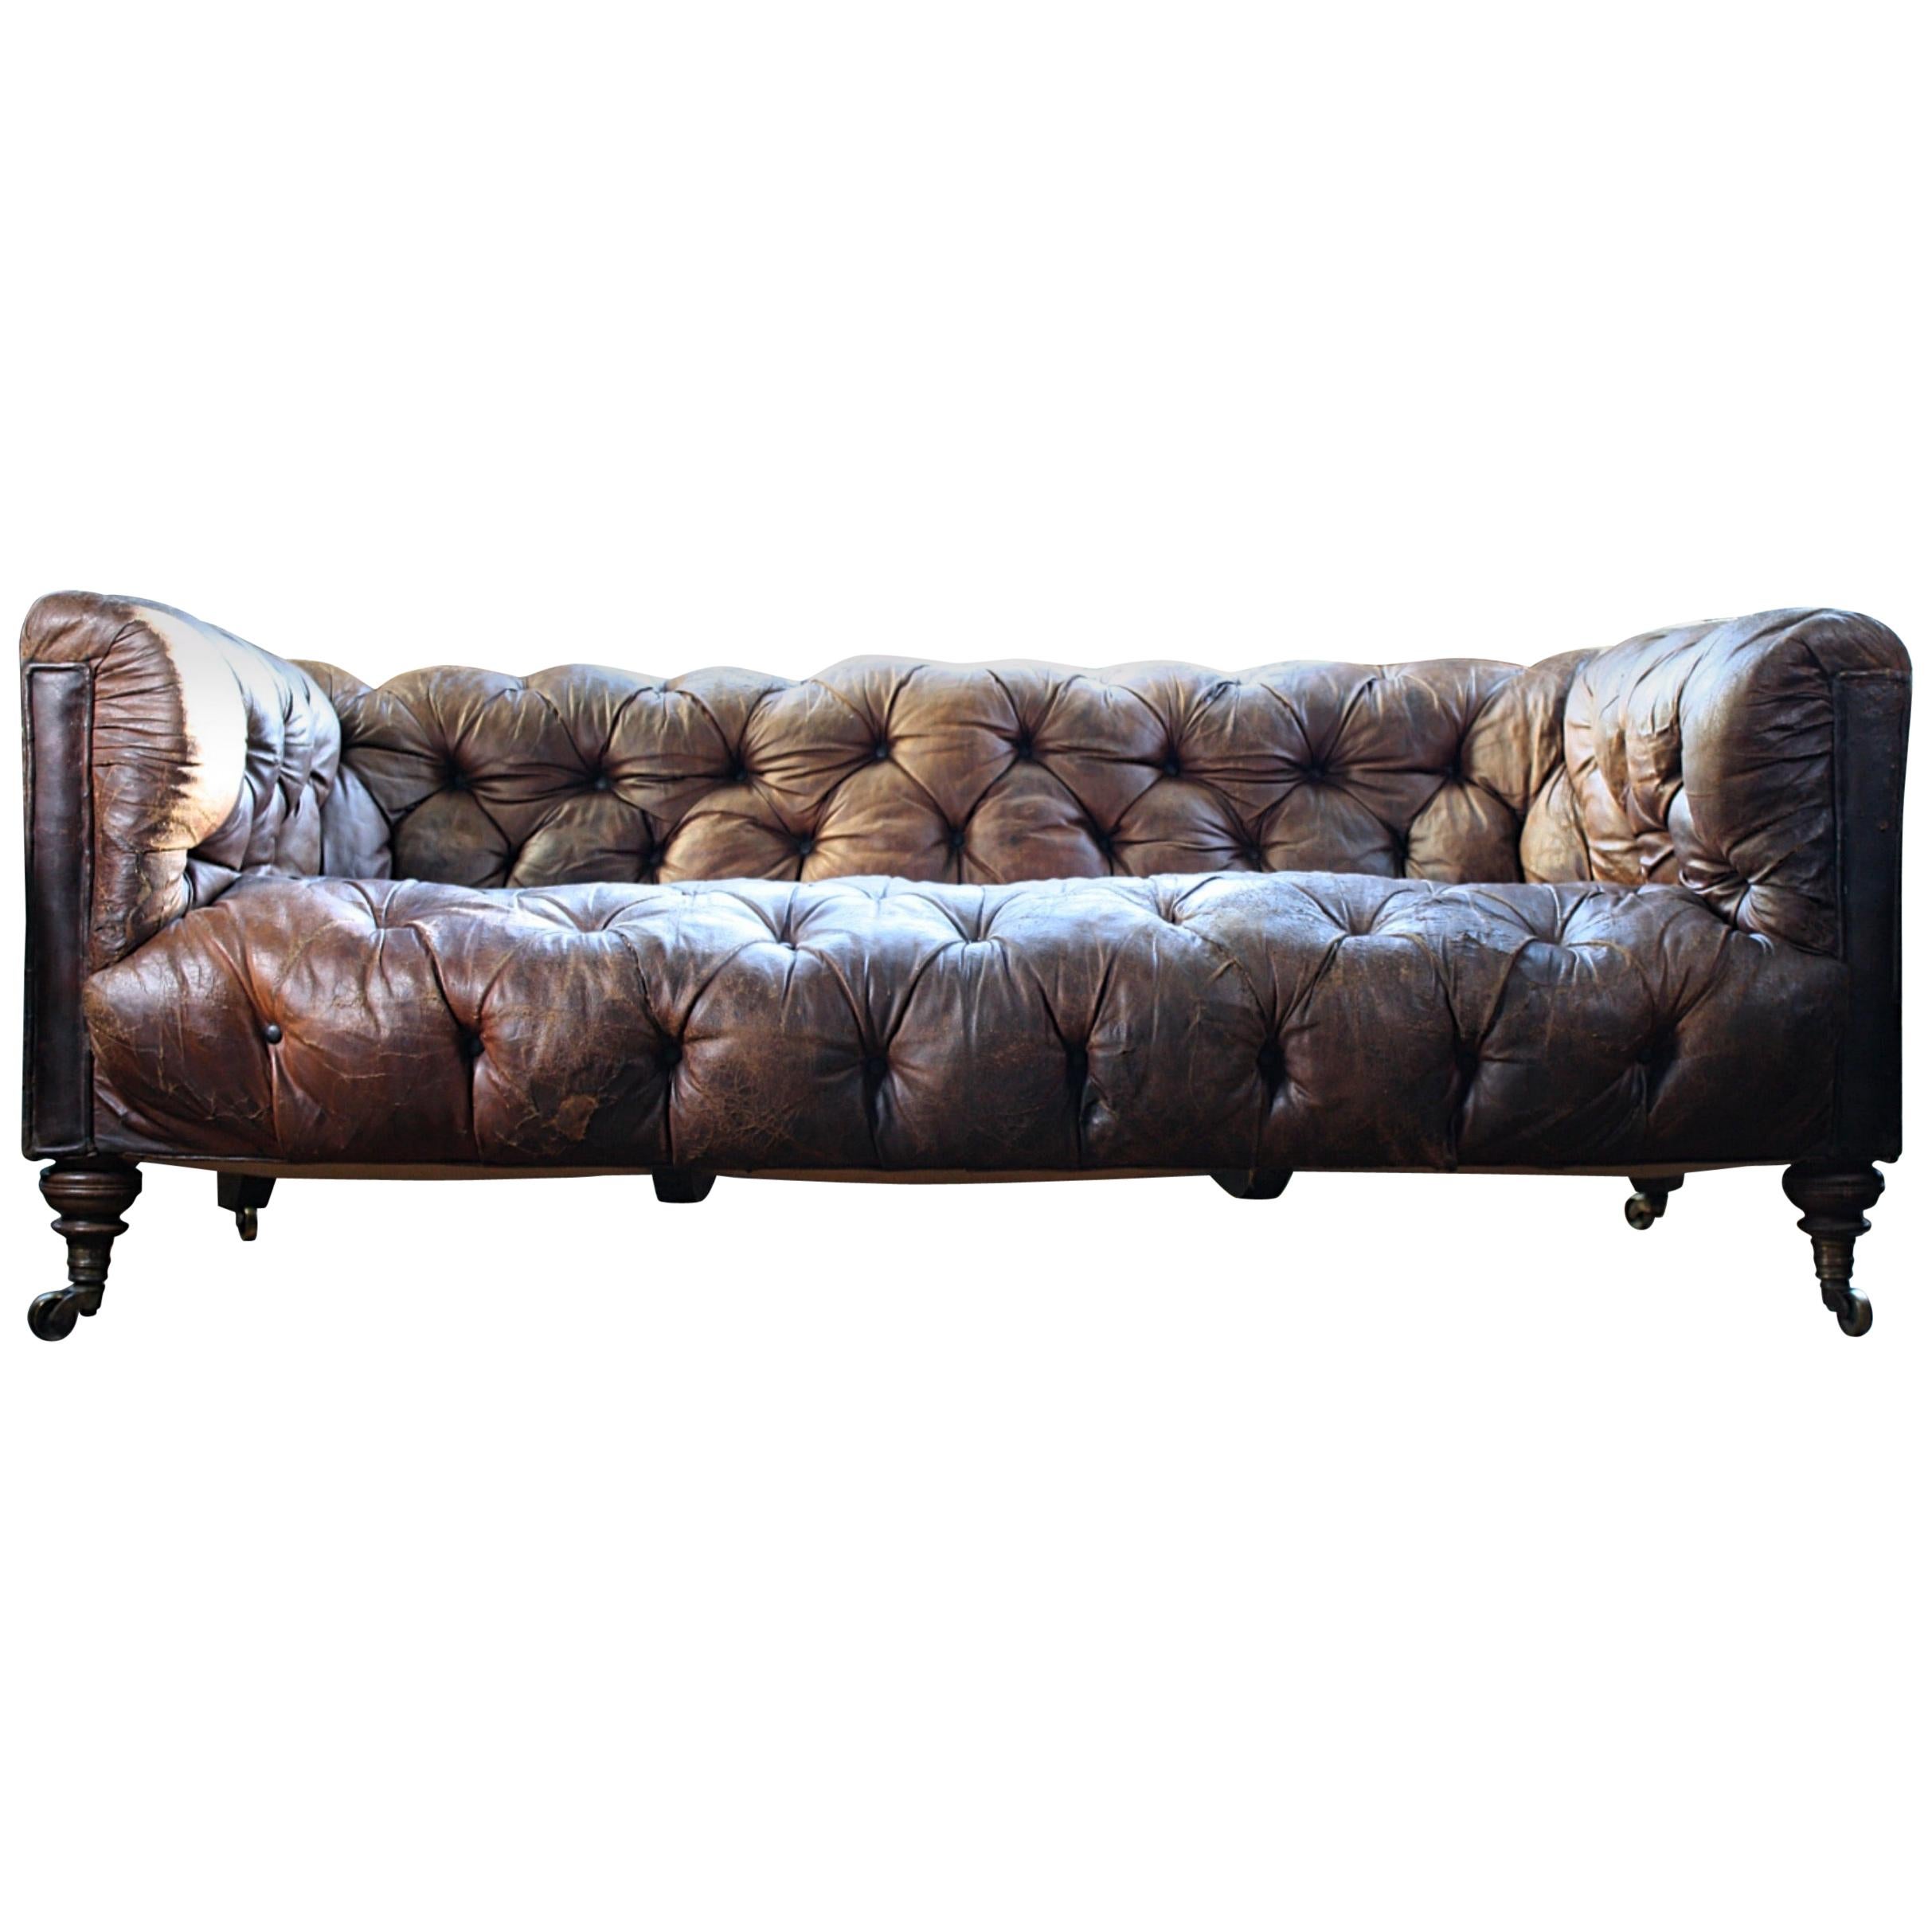 Late 19th Century English Howard and Sons Brown Leather Chesterfield Sofa, 1880 